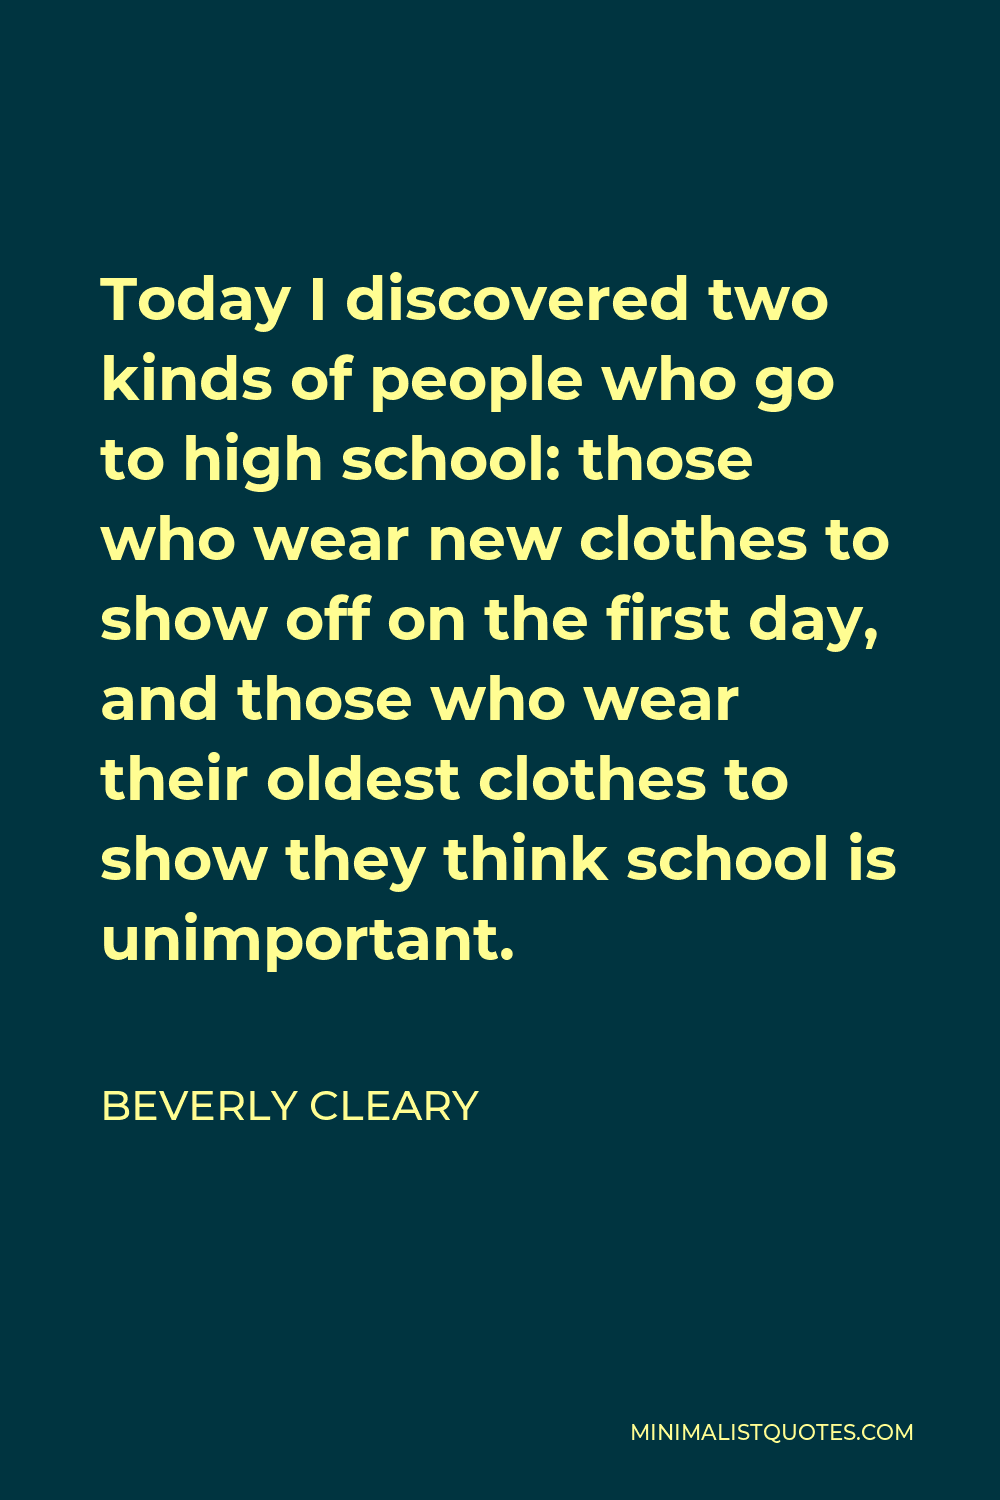 Beverly Cleary Quote - Today I discovered two kinds of people who go to high school: those who wear new clothes to show off on the first day, and those who wear their oldest clothes to show they think school is unimportant.